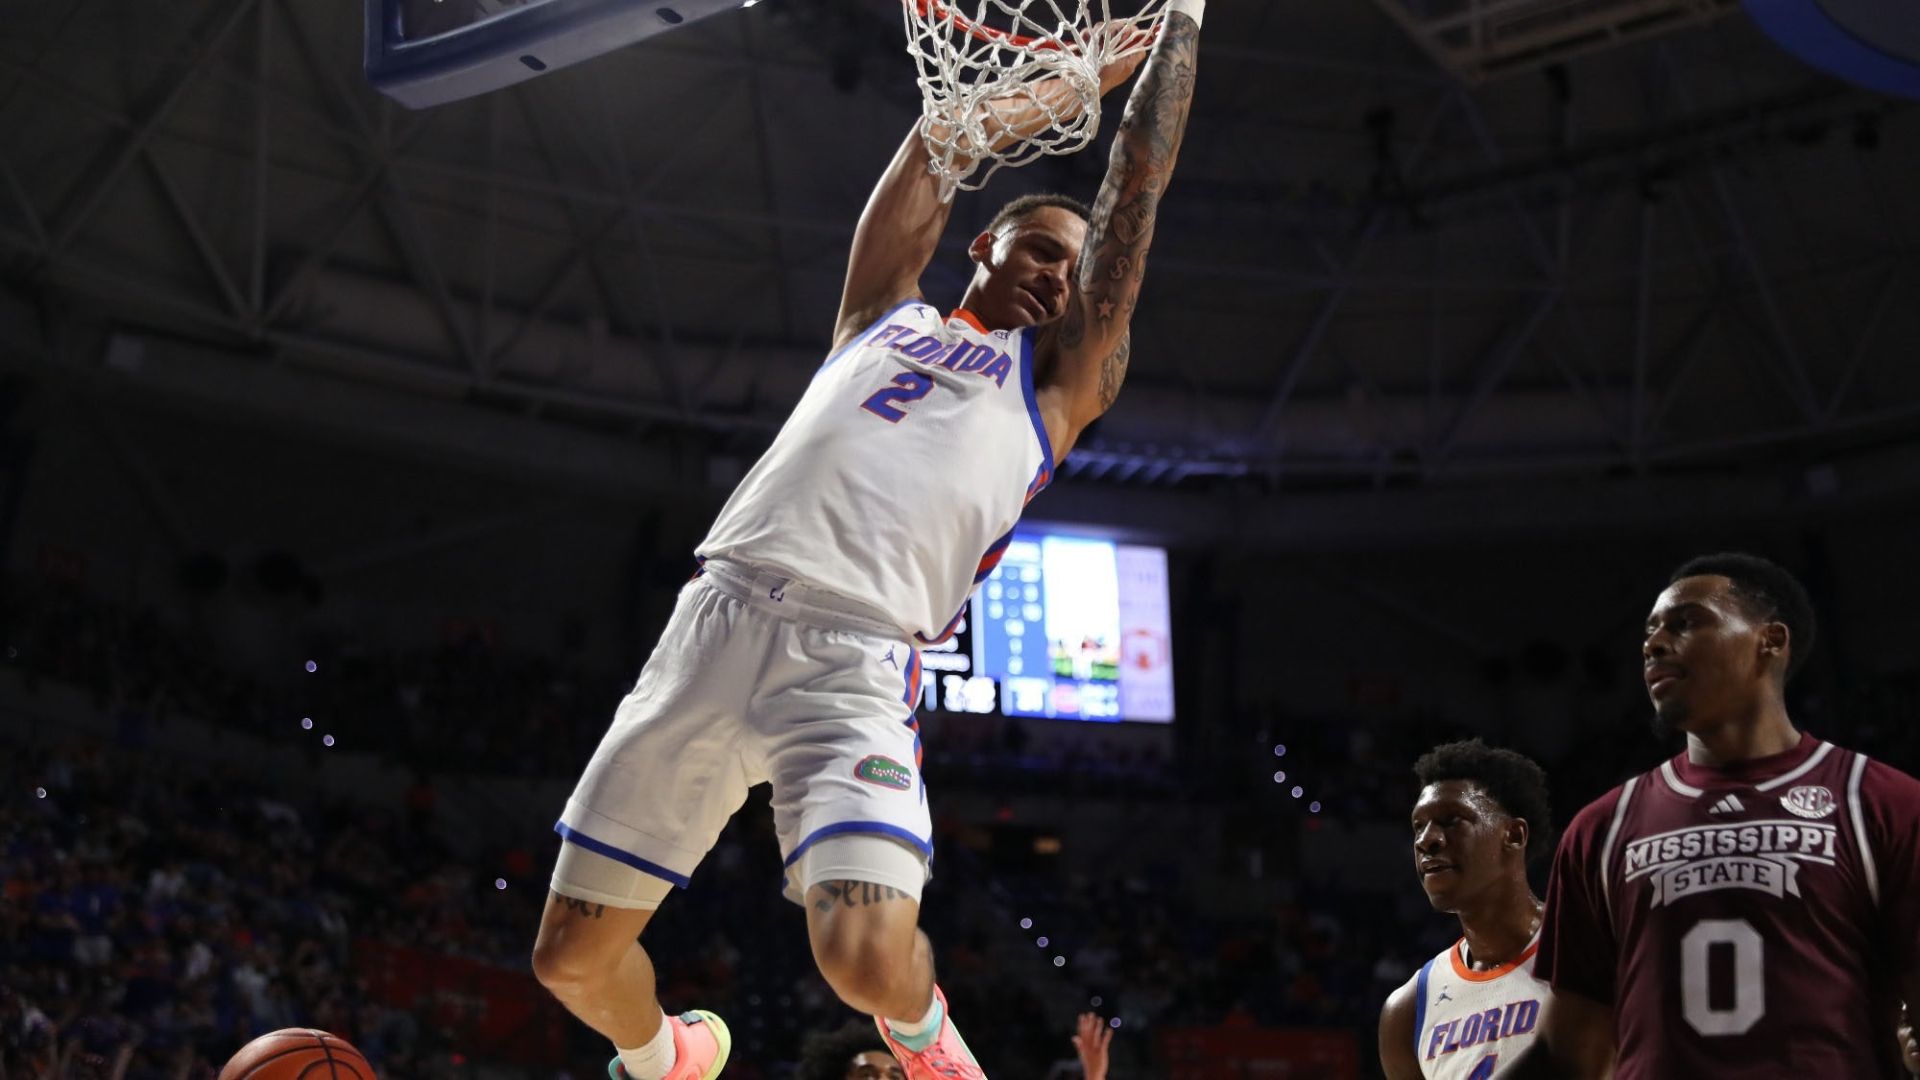 Richard powers Florida past Mississippi State